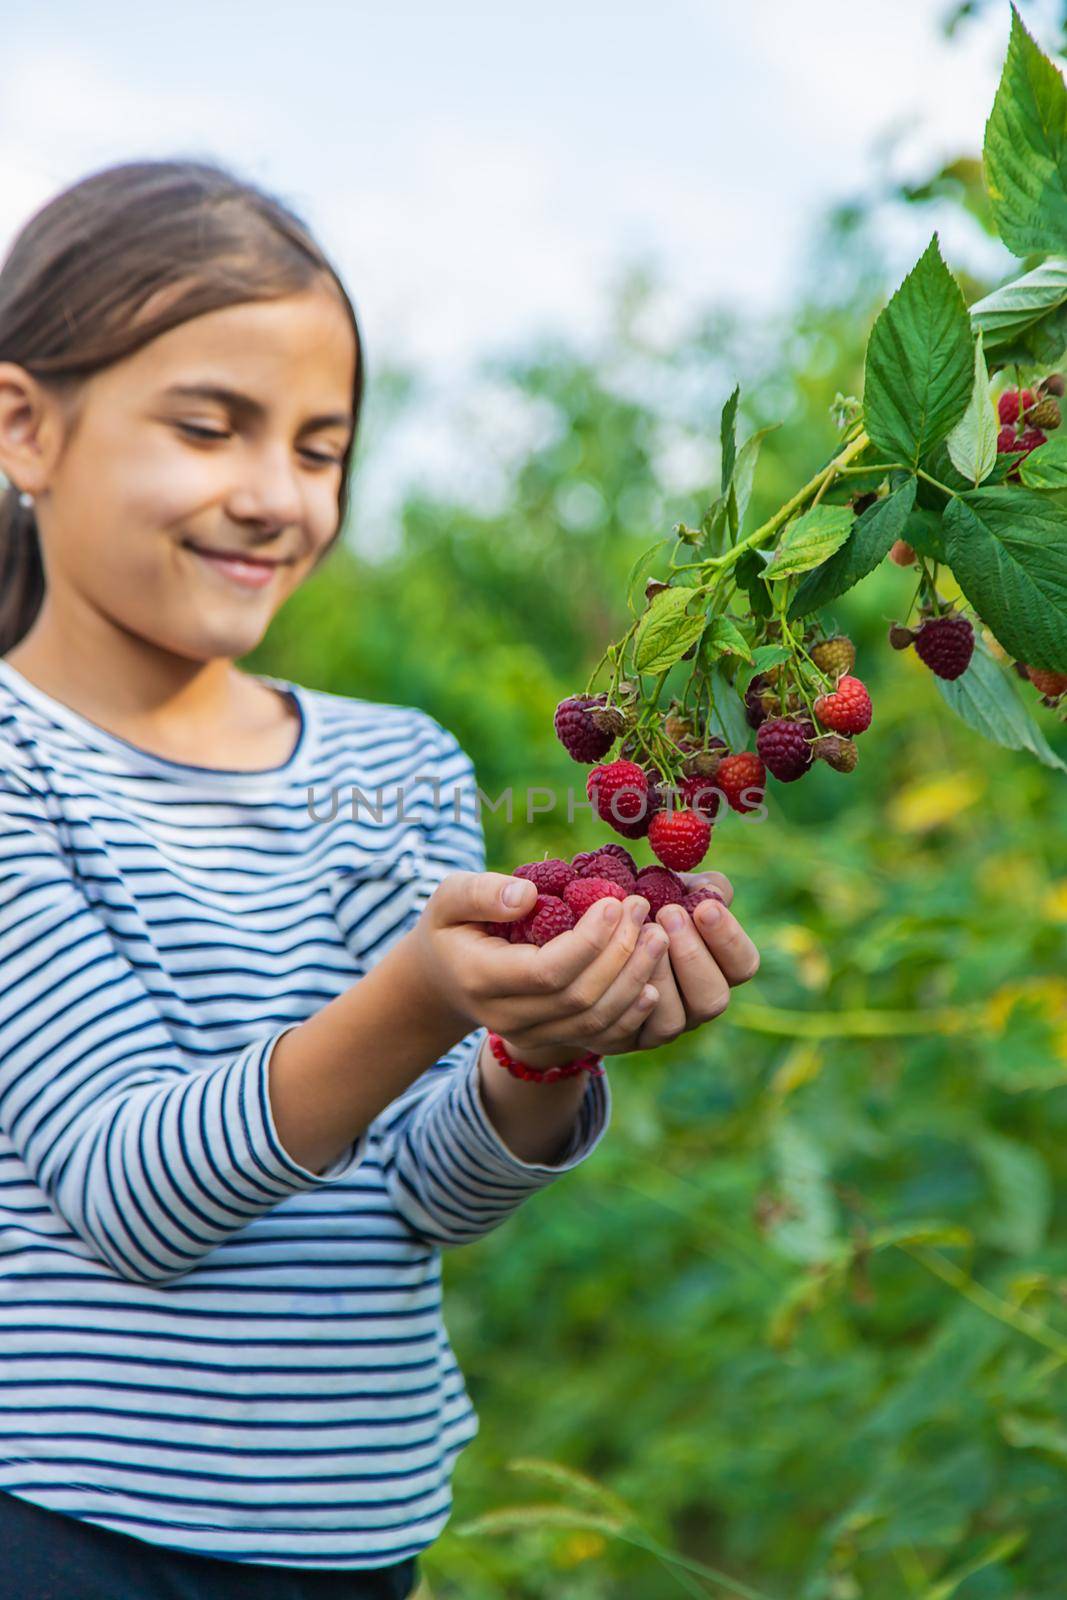 A child harvests raspberries in the garden. Selective focus. by yanadjana